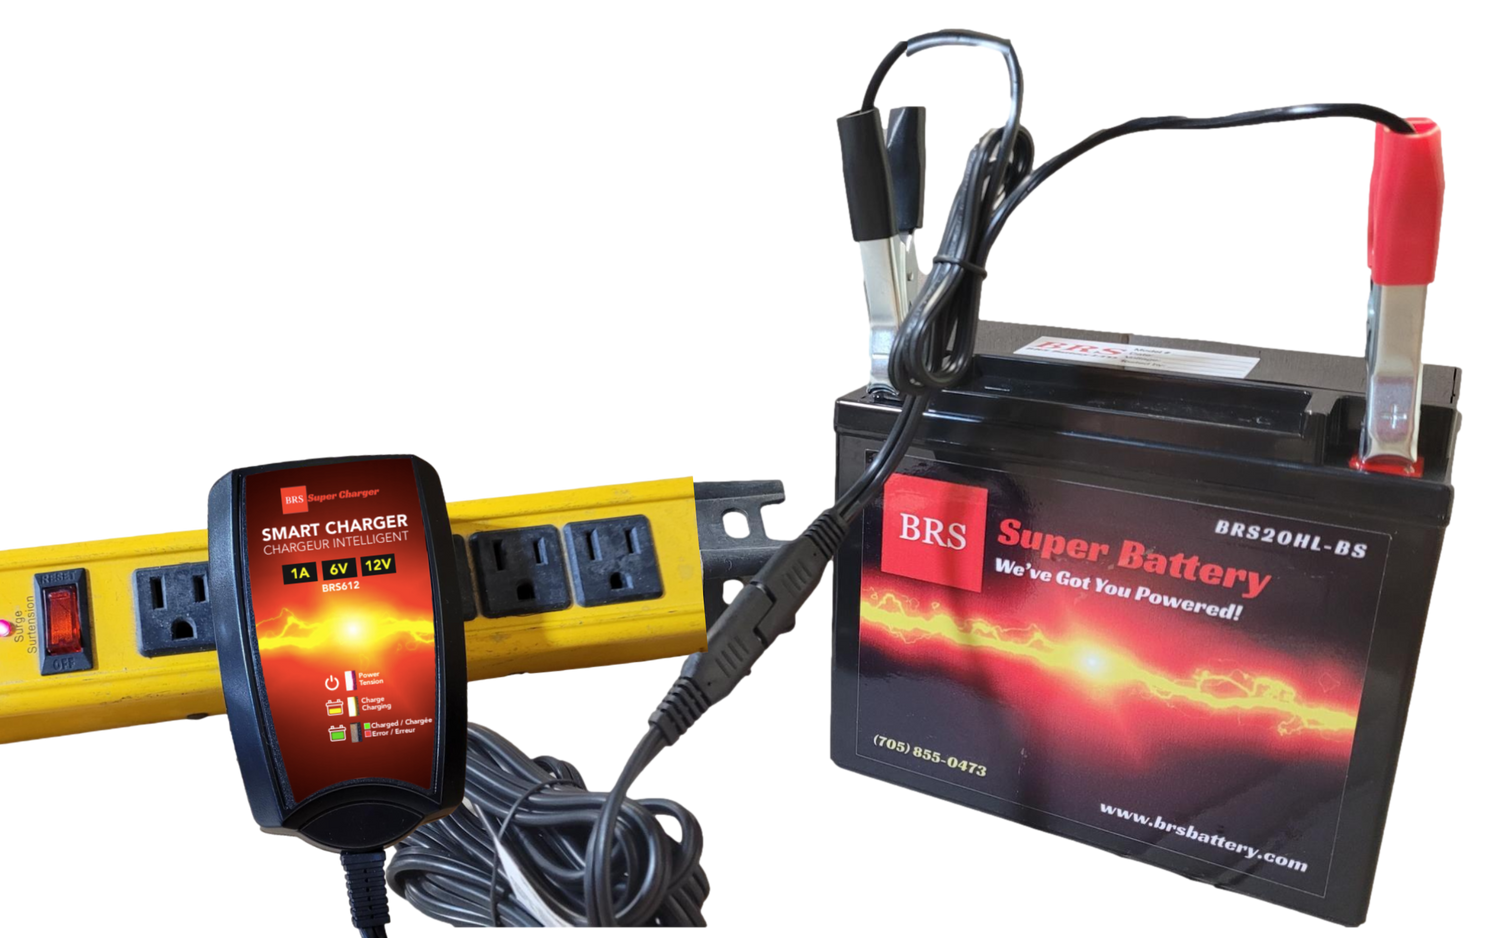 High Performance BRS9B-BS 2 Year Battery & Smart Charger / Maintainer Combo Bundle Kit 12v Sealed AGM PowerSports Battery - BRS Super Battery